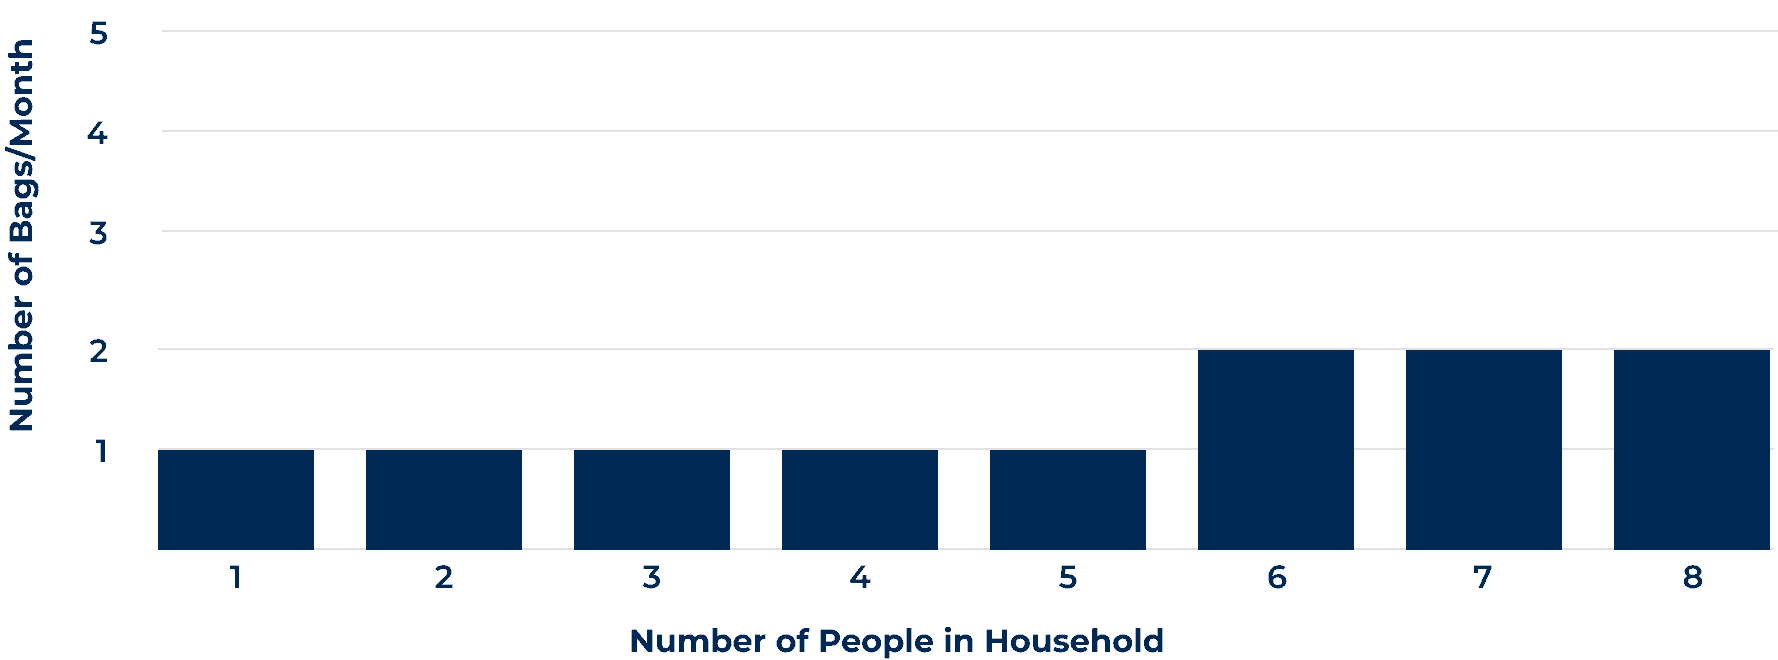 A data table that details the number of 50-pound bags of water softener salt needed per month based on the number of people in a household using moderately hard water.